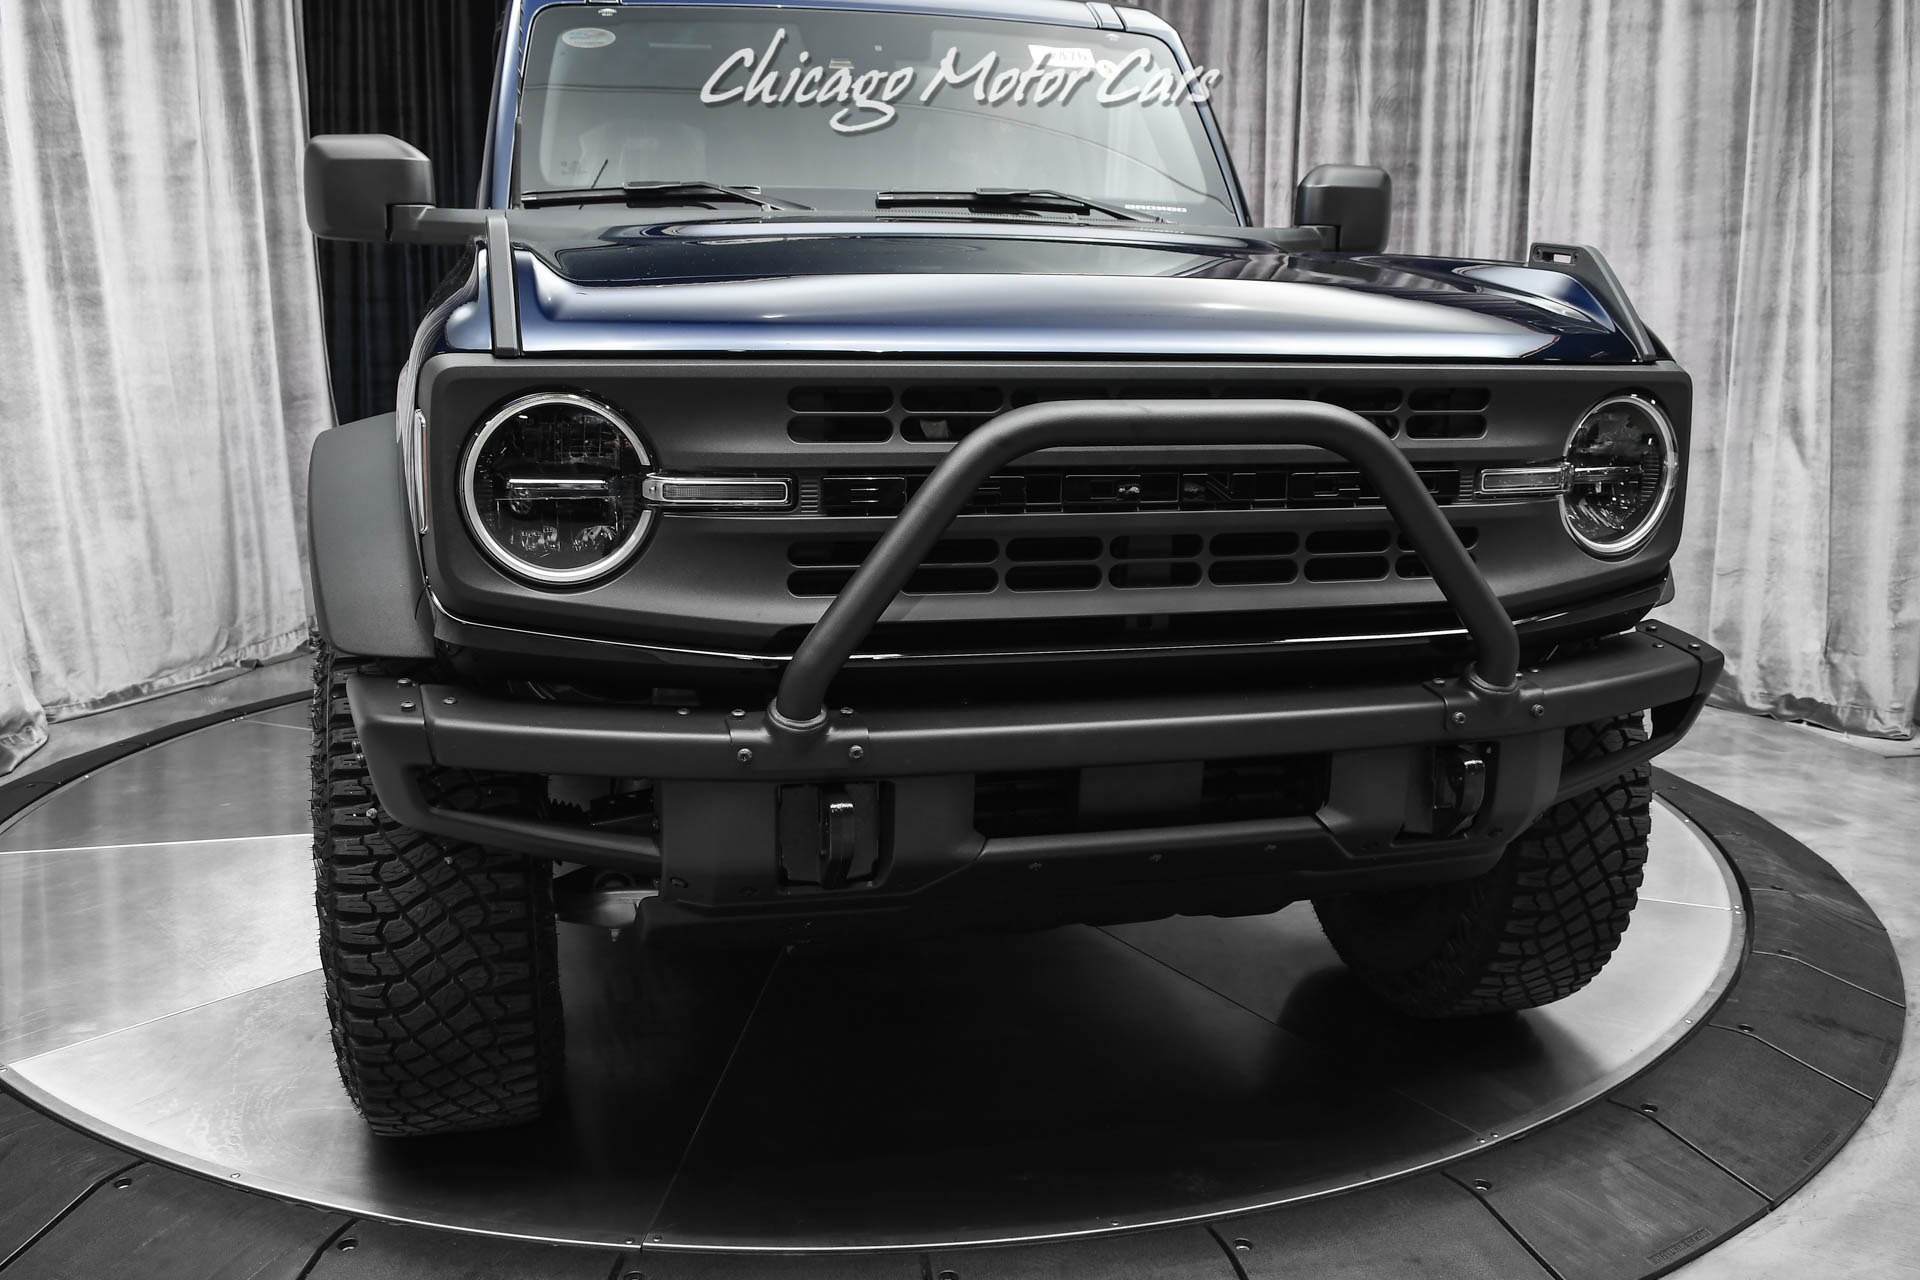 Used-2021-Ford-Bronco-4X4-Sasquatch-Package-Steel-Front-Bumper-Brush-Guard-Beadlock-Wheels